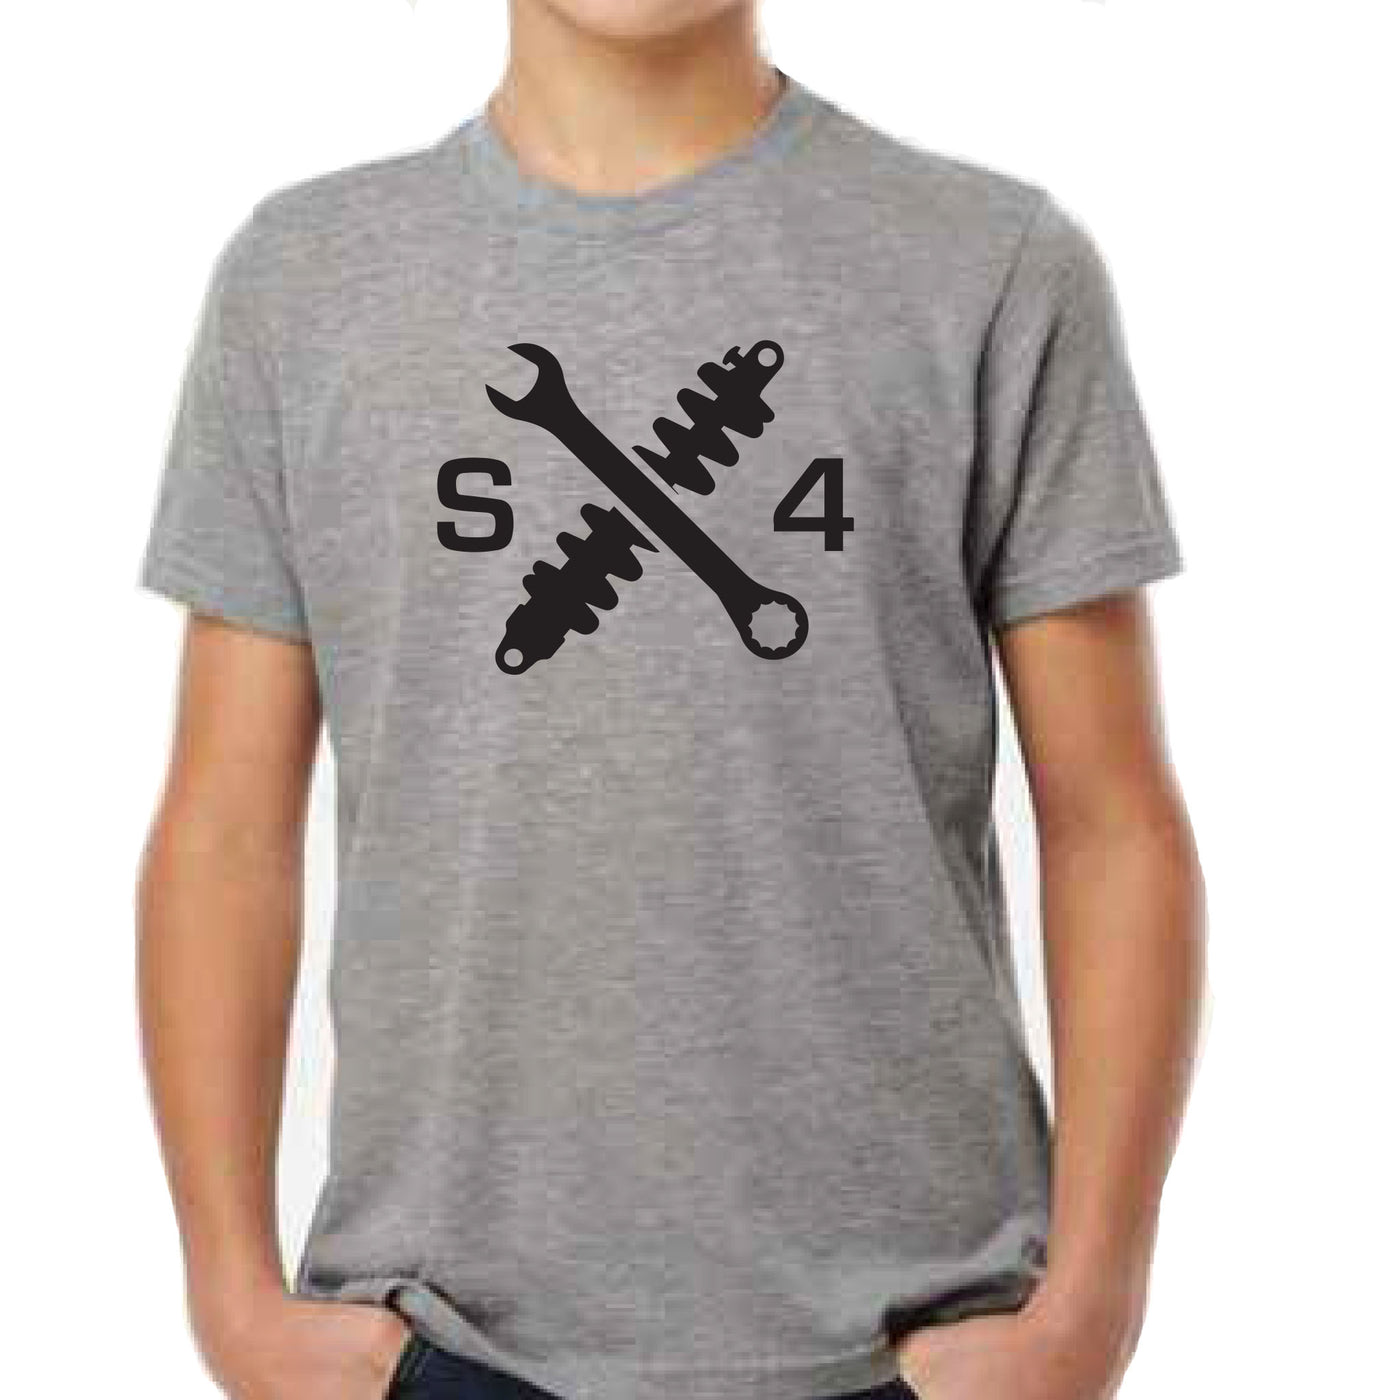 S4 Youth T-Shirt